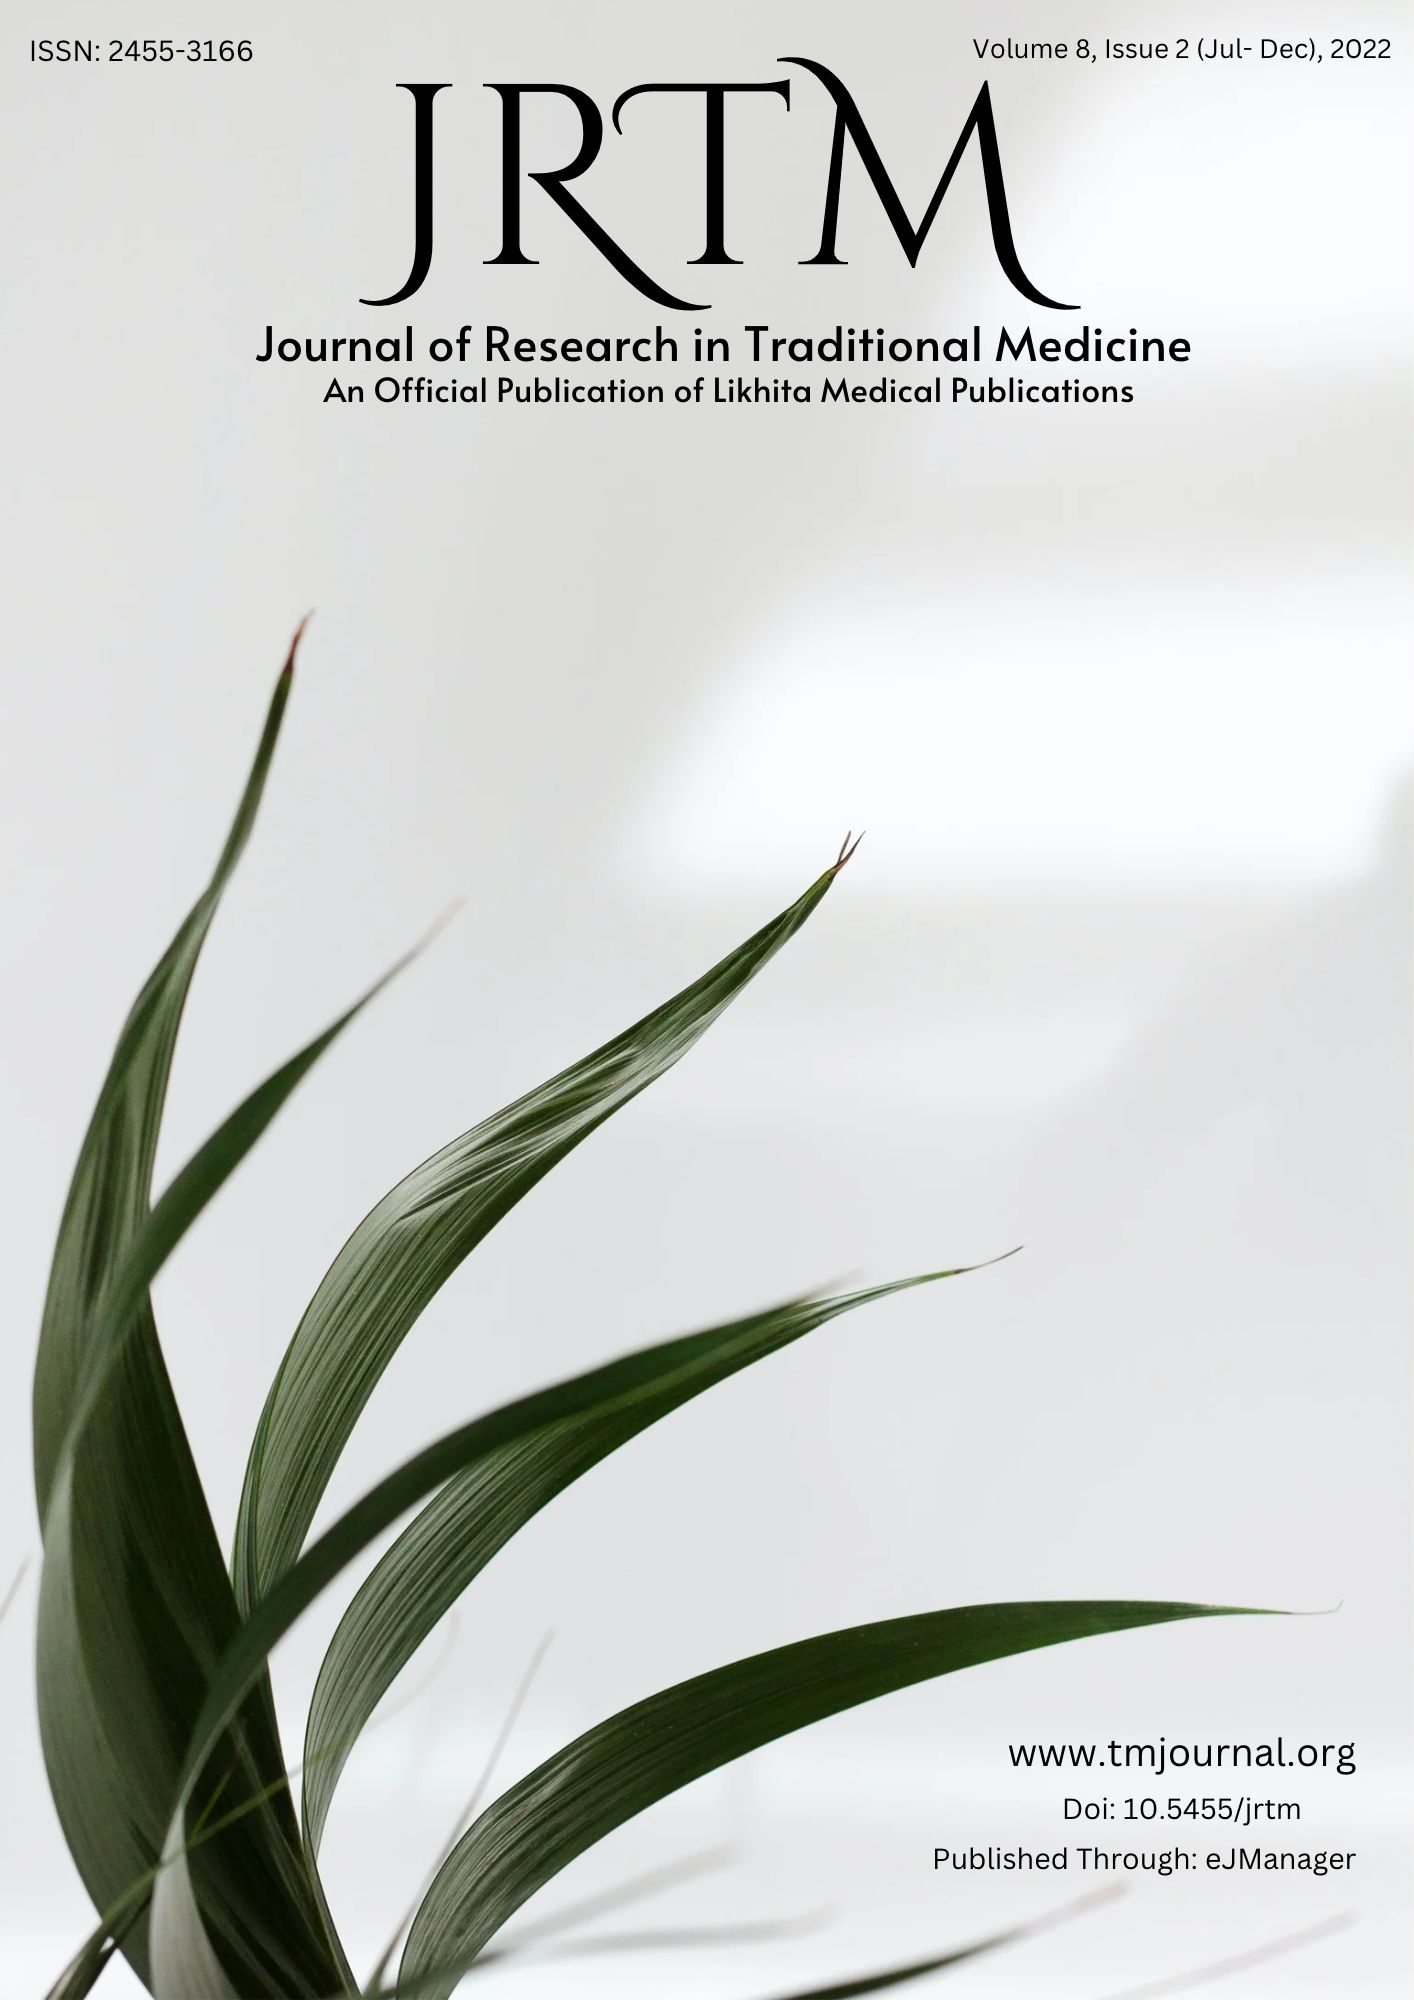 JOURNAL OF RESEARCH IN TRADITIONAL MEDICINE